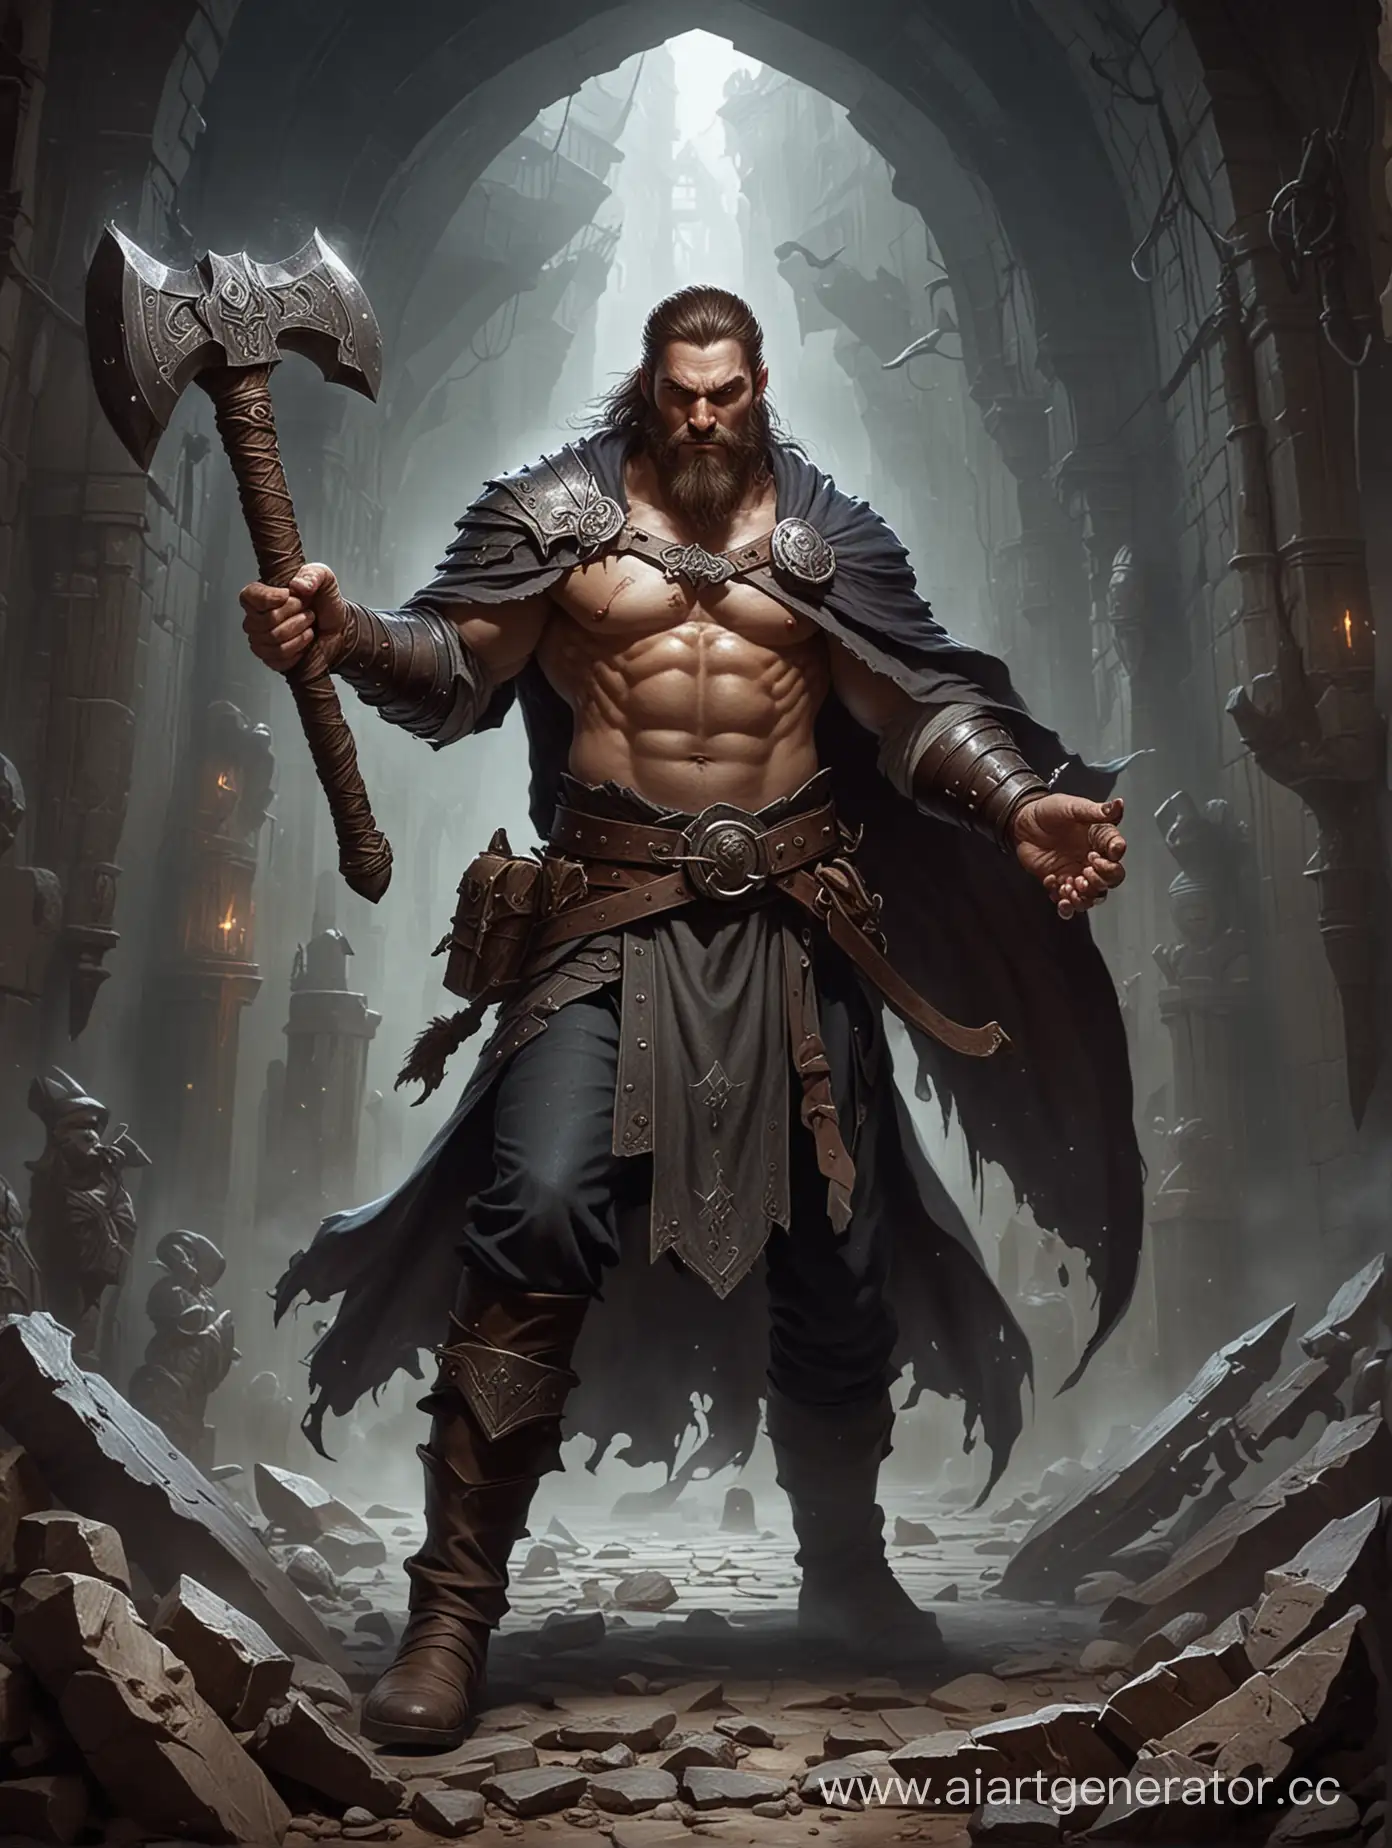 Mighty-Dungeon-Keeper-with-TwoHanded-Axe-Fantasy-Mythology-Illustration